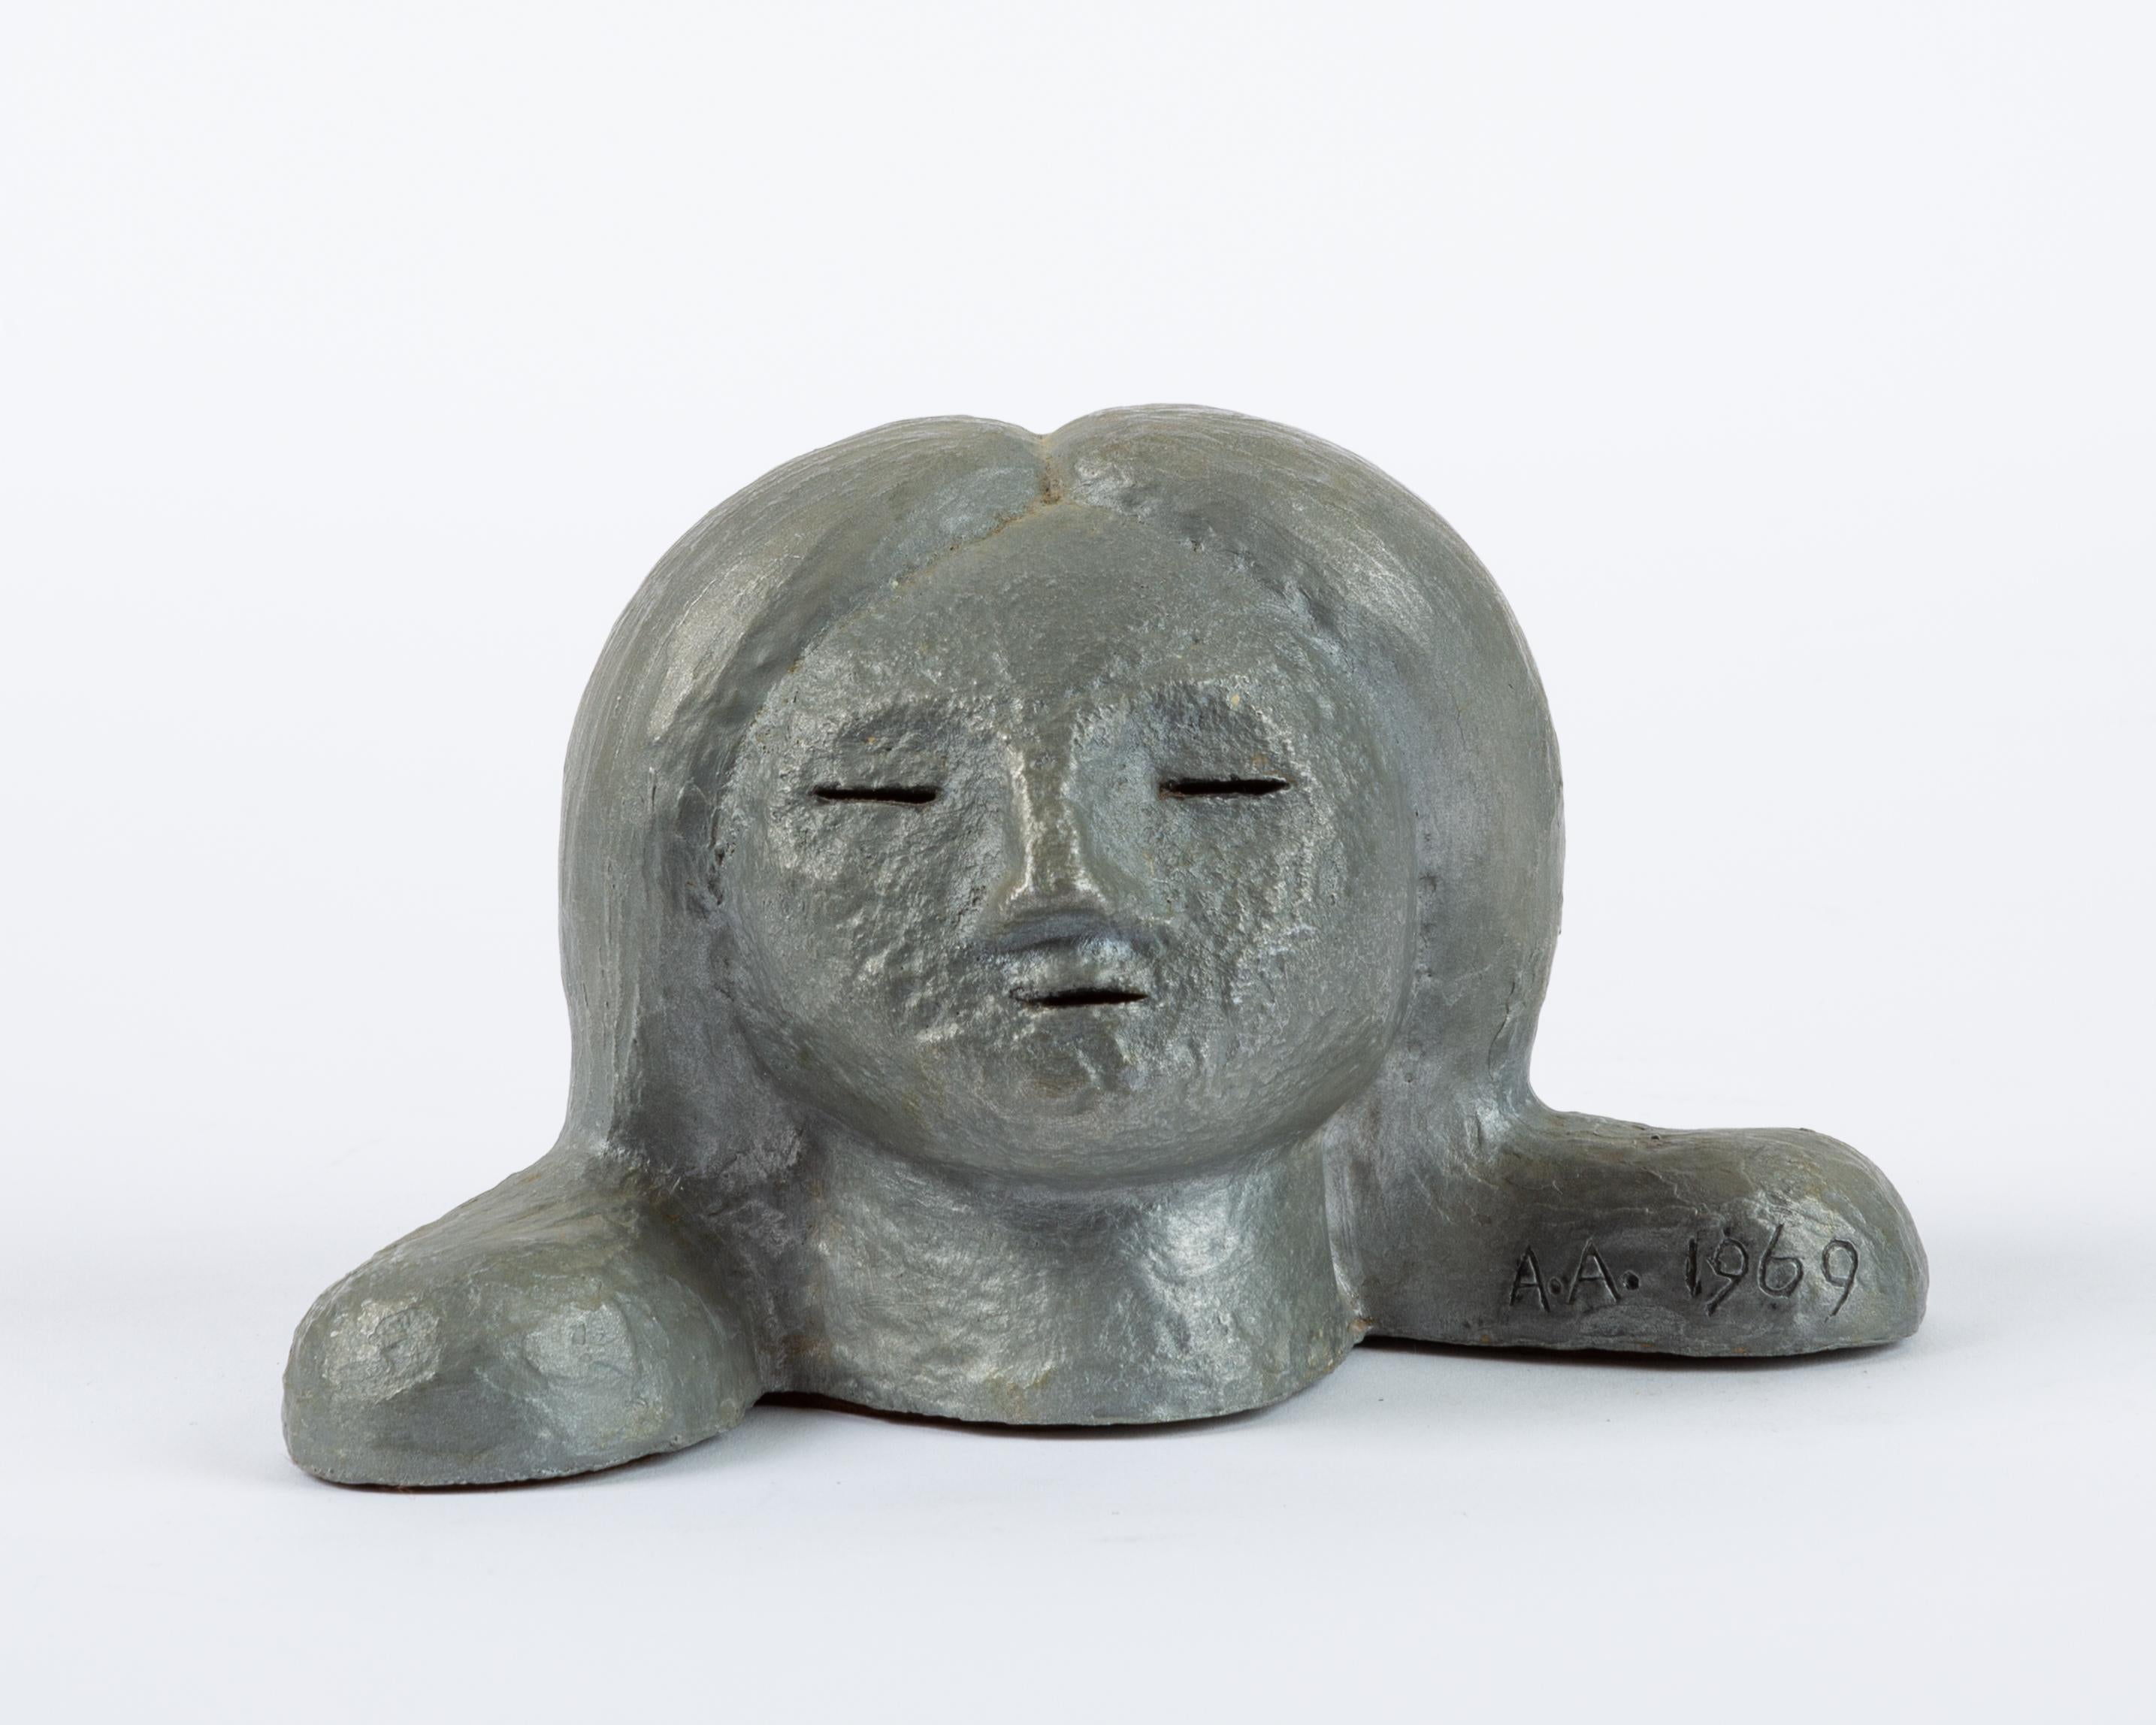 A small plaster head of a child with exaggerated pigtails, wide nose, and delicate eyes and mouth. Built over a papier-mâché structure, the figurine has been painted with a metallic silver enamel. Inscribed on foot, “Alexa Acuña August 16,